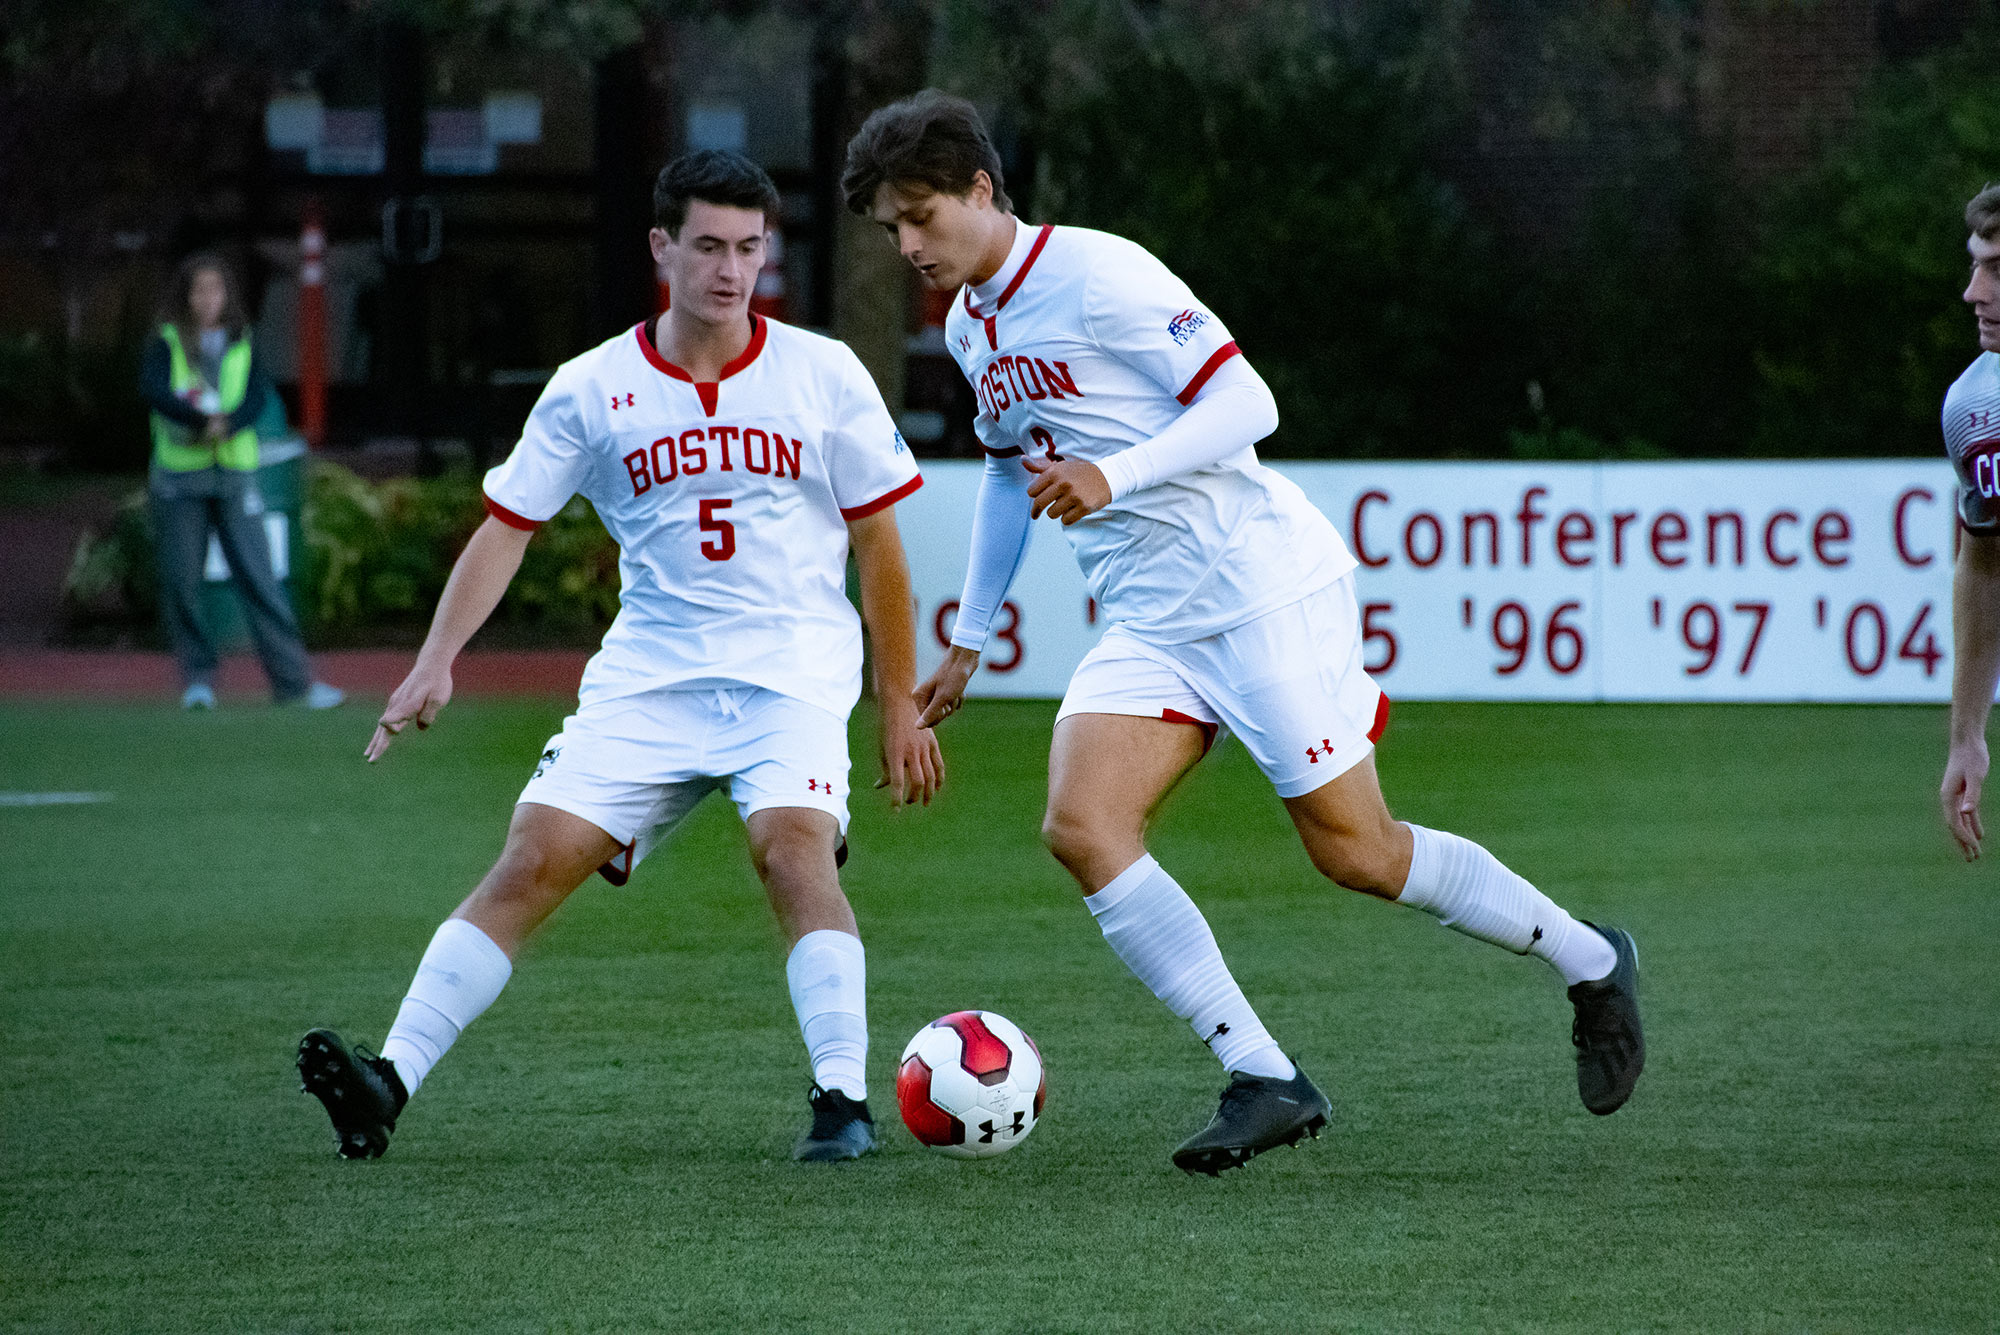 BU men's soccer players advance the ball during a game against Colgate University.